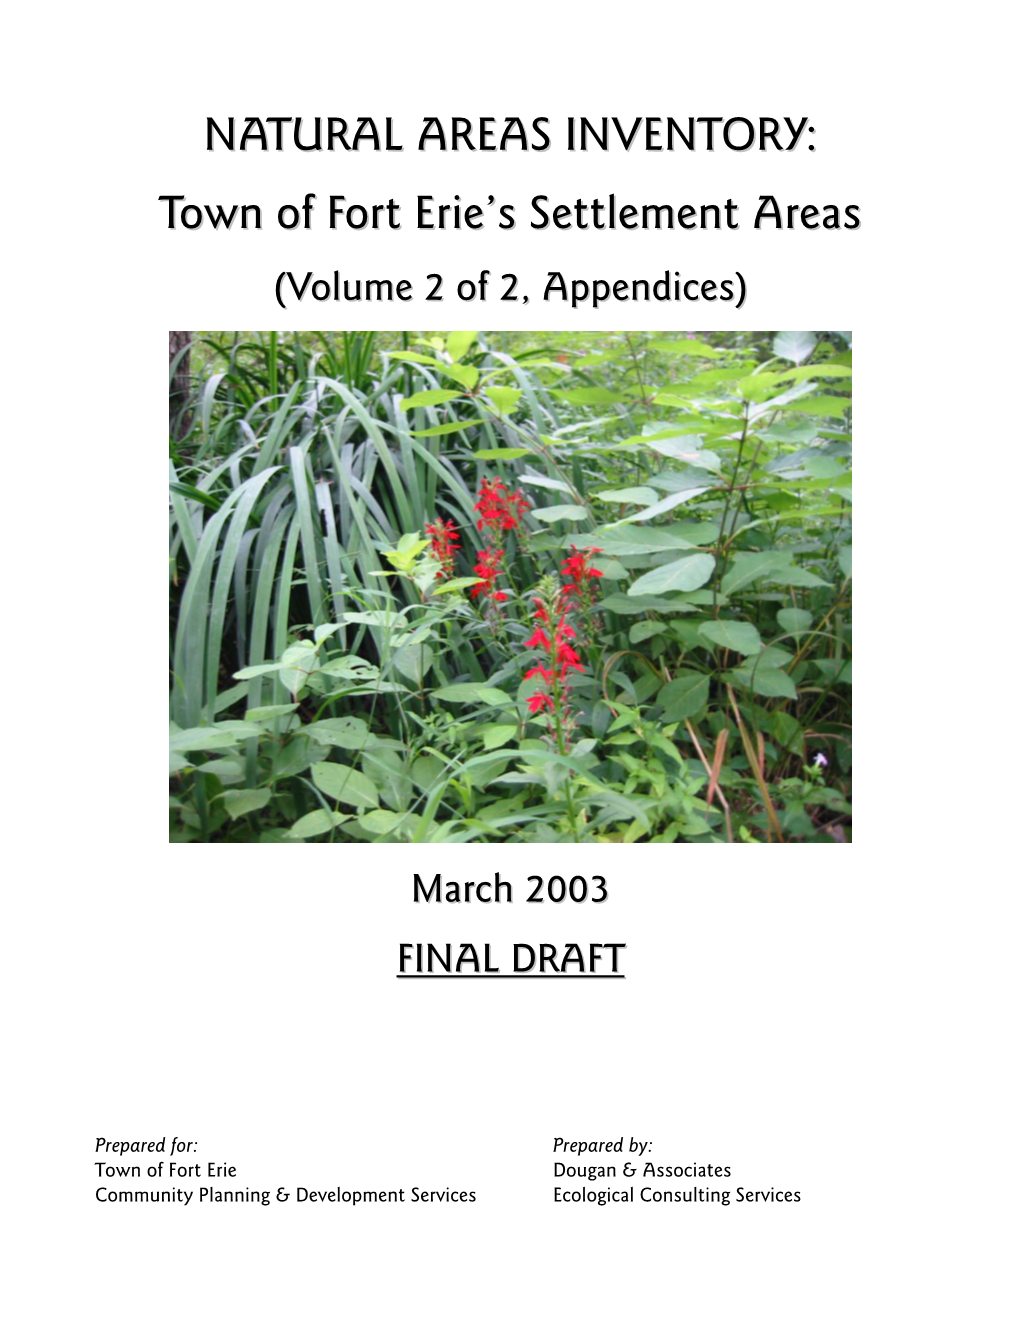 Natural Areas Inventory: Town of Fort Erie’S Settlement Areas Ecological Consulting Services I Volume 2 - FINAL DRAFT - March 2003